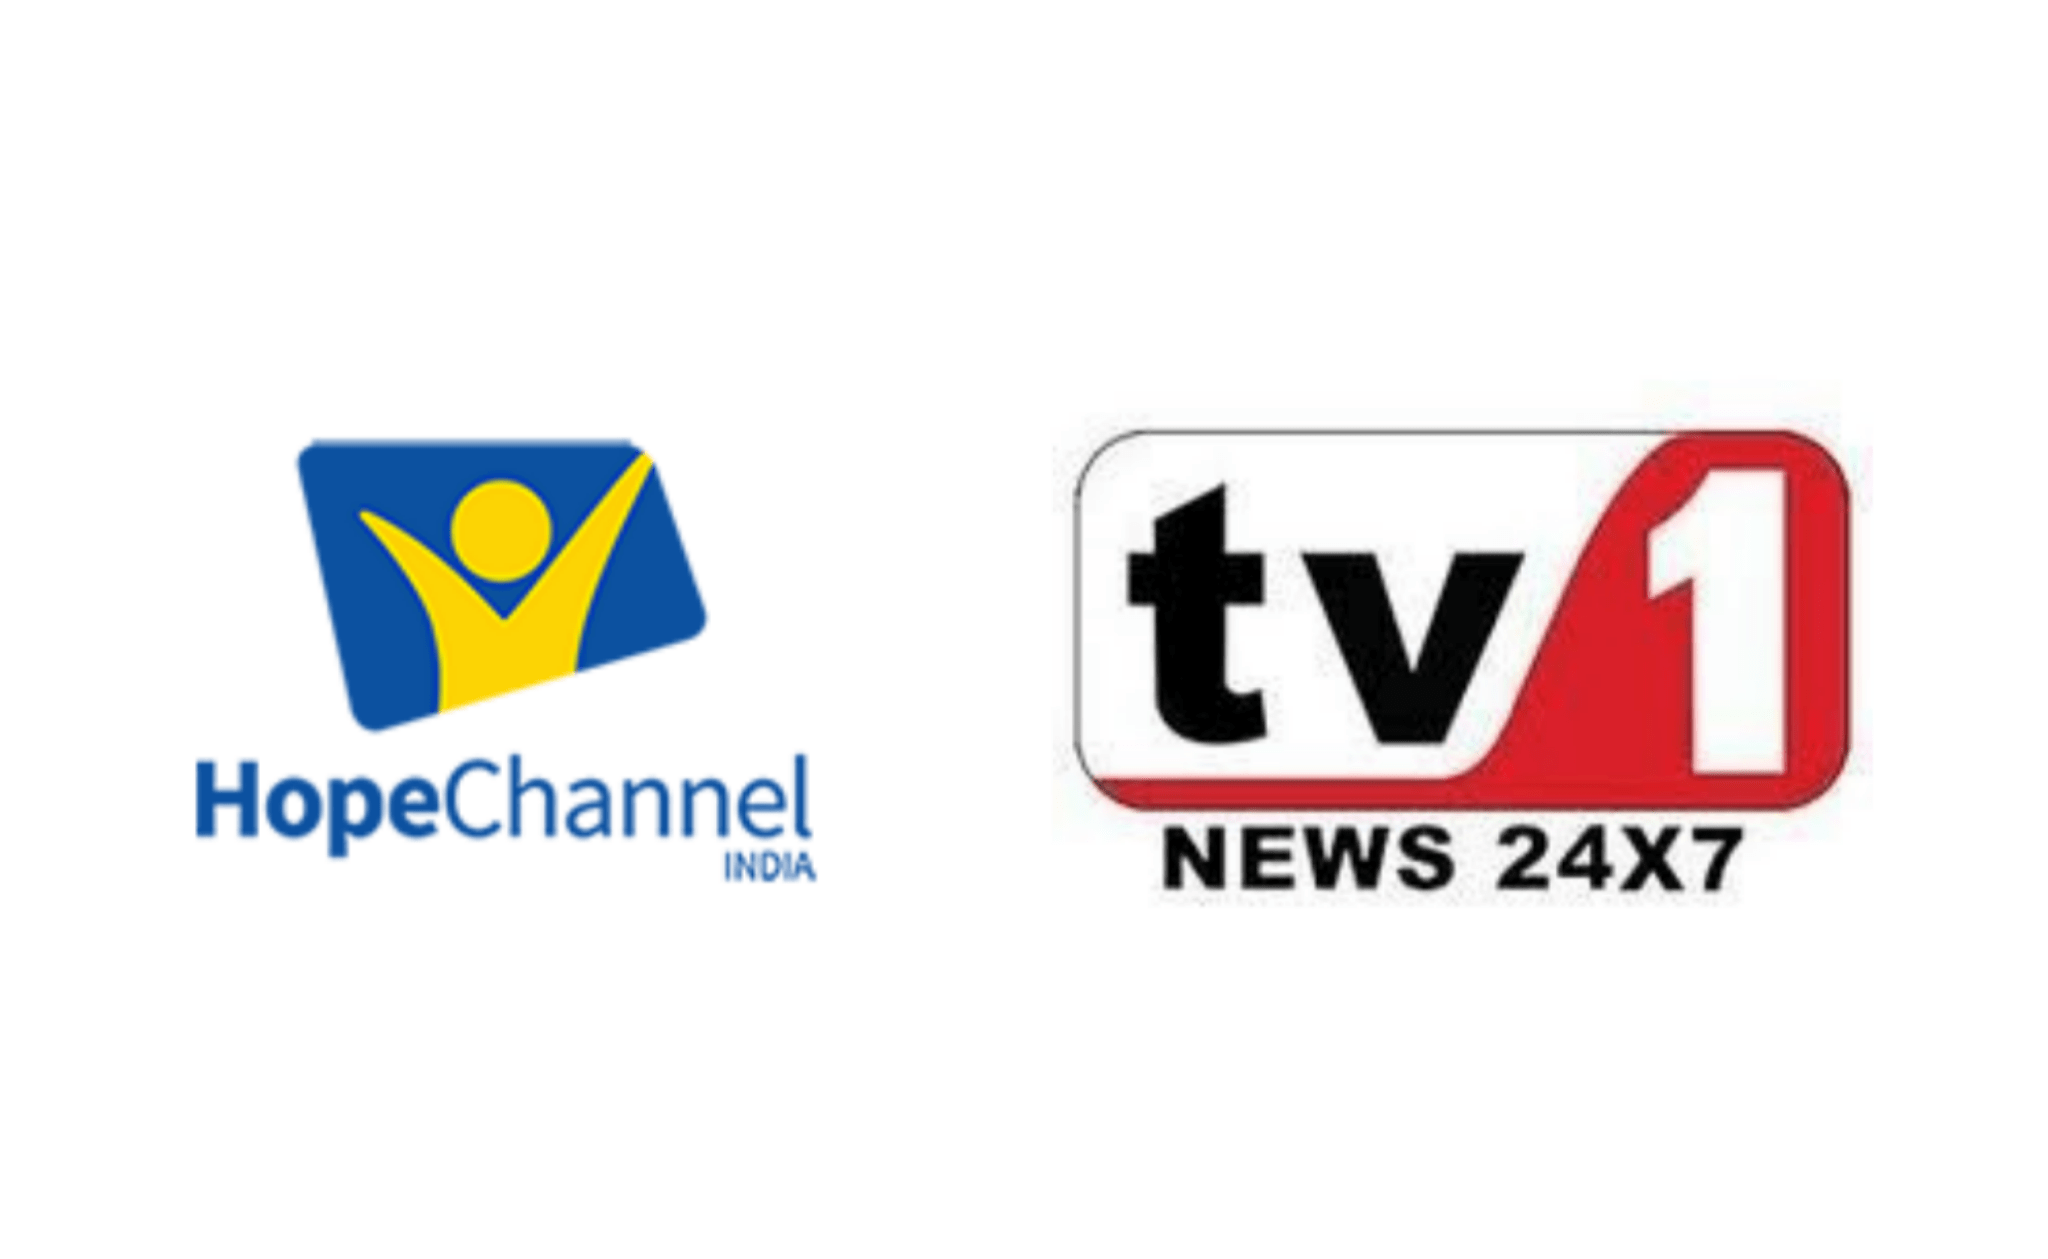 Hope Channel TV1 News